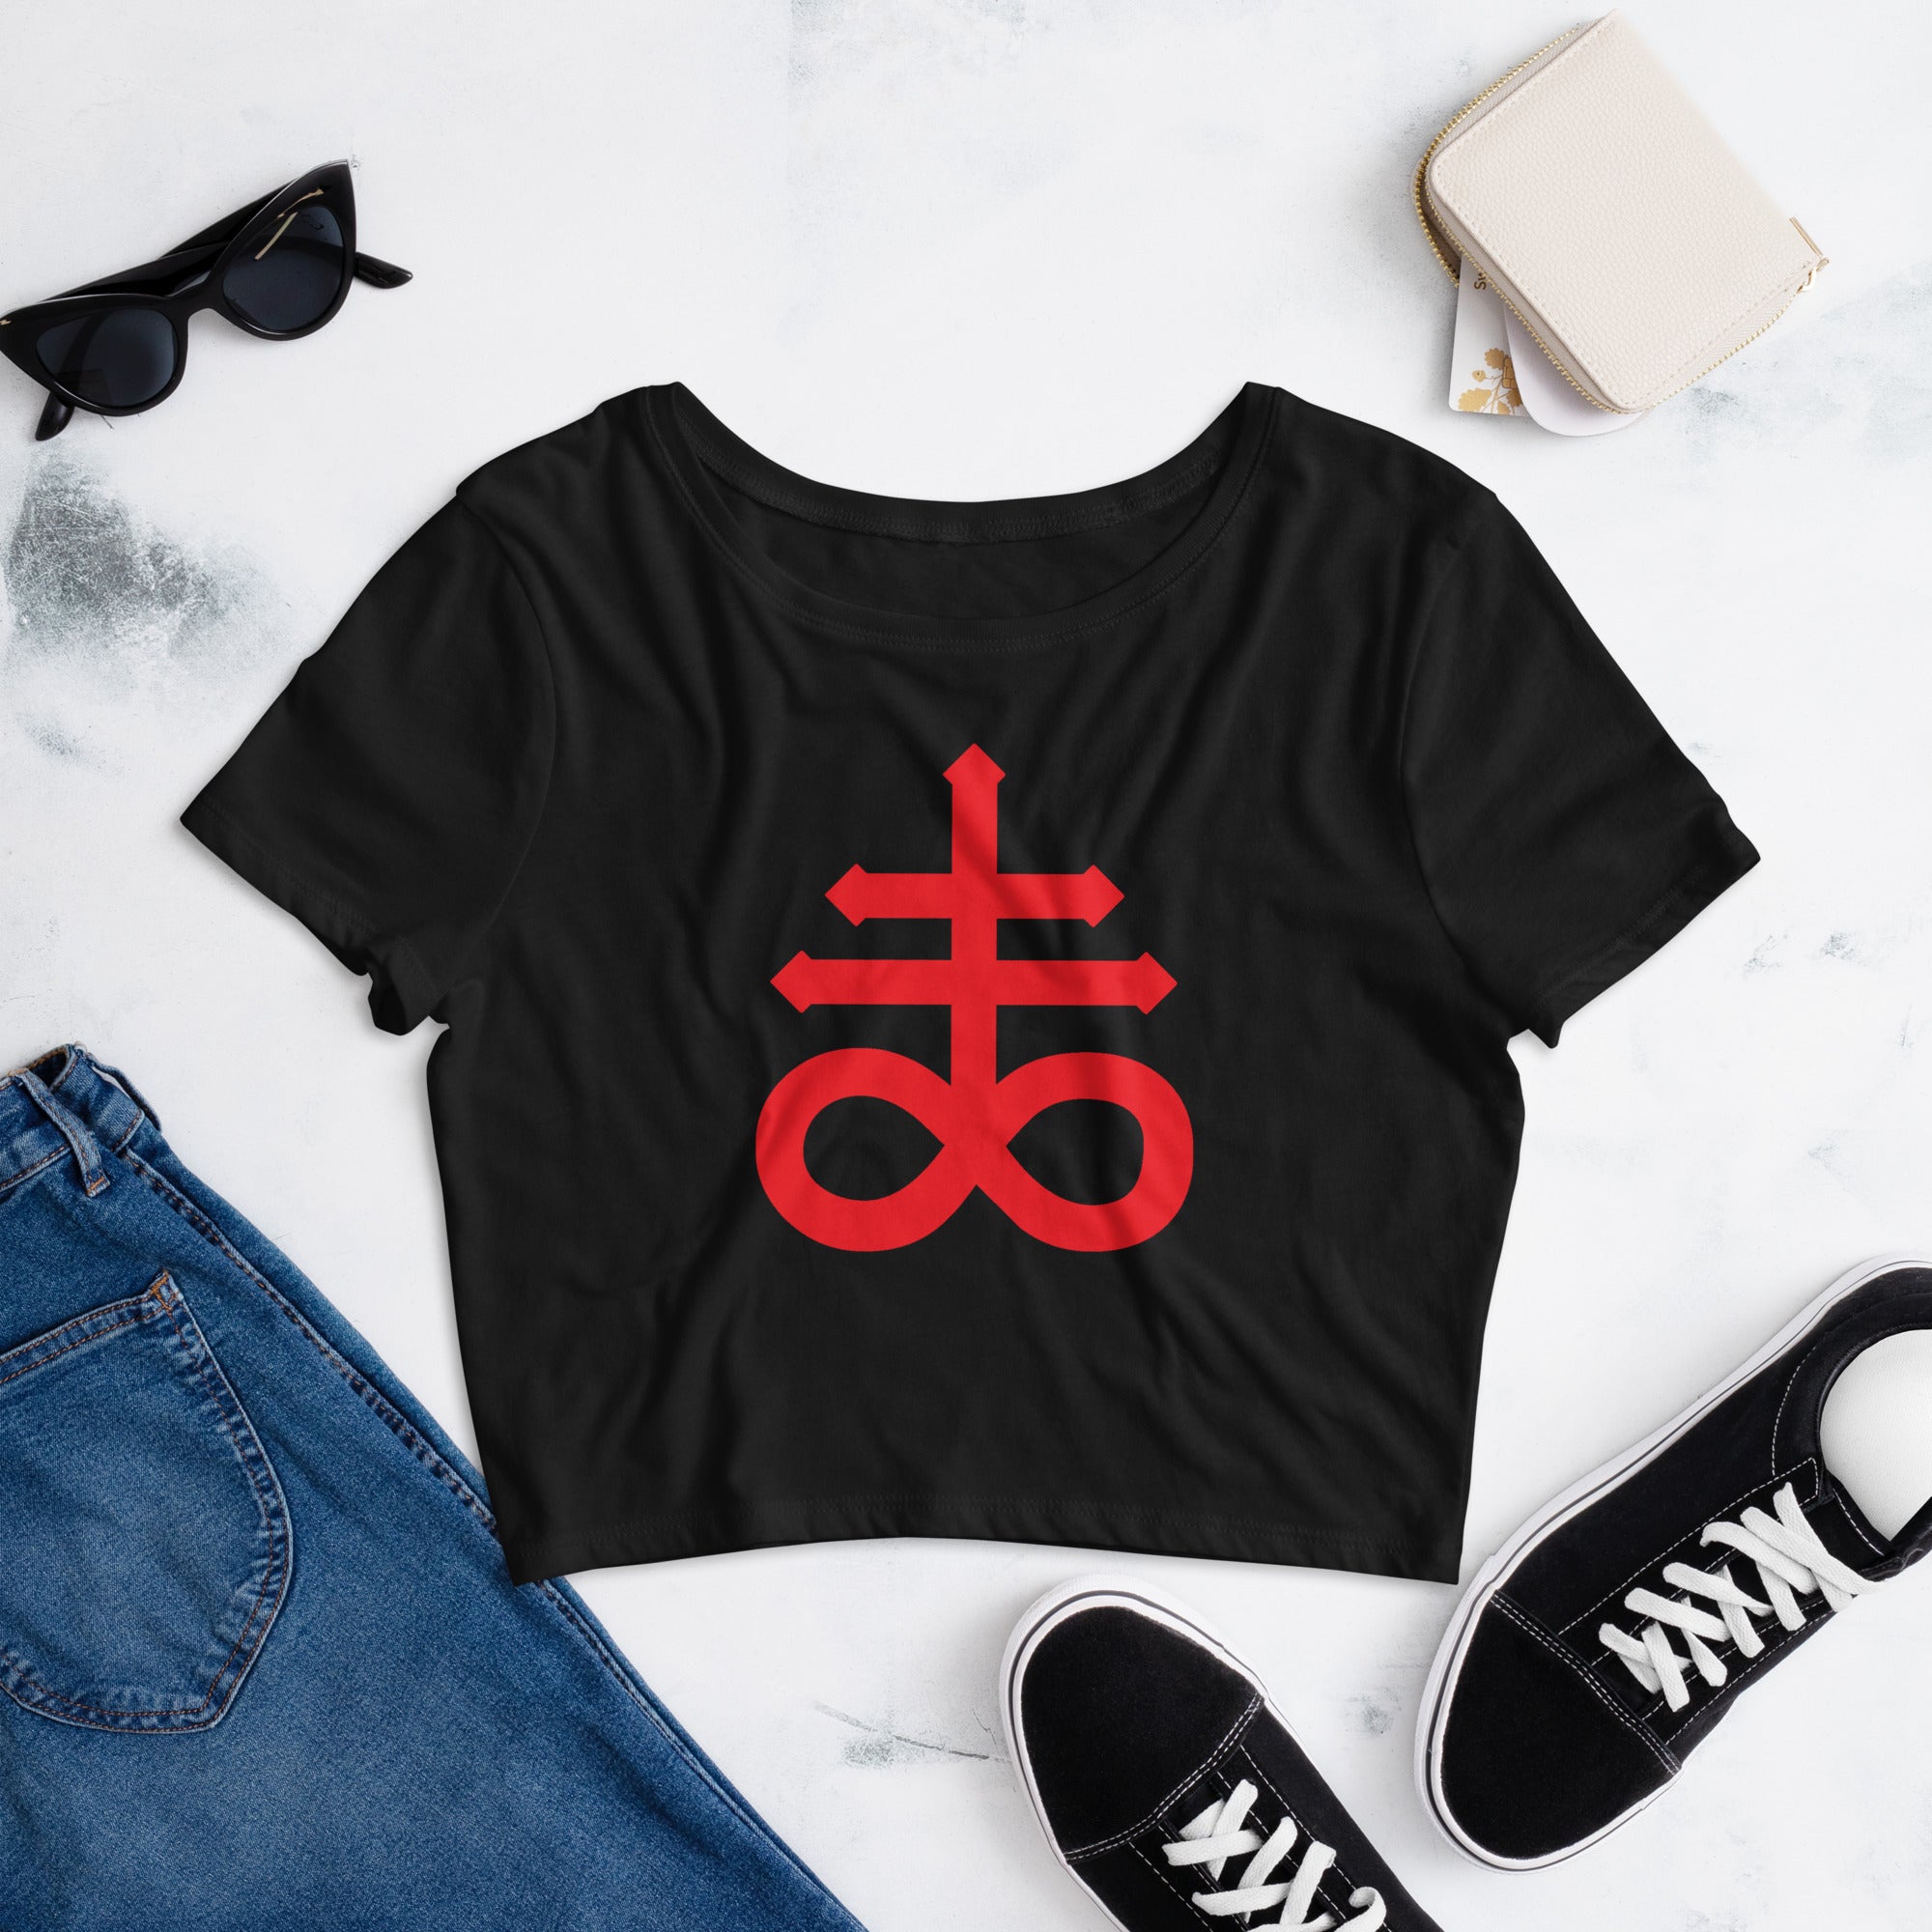 The Leviathan Cross of Satan Occult Symbol Women’s Crop Tee Red Print - Edge of Life Designs